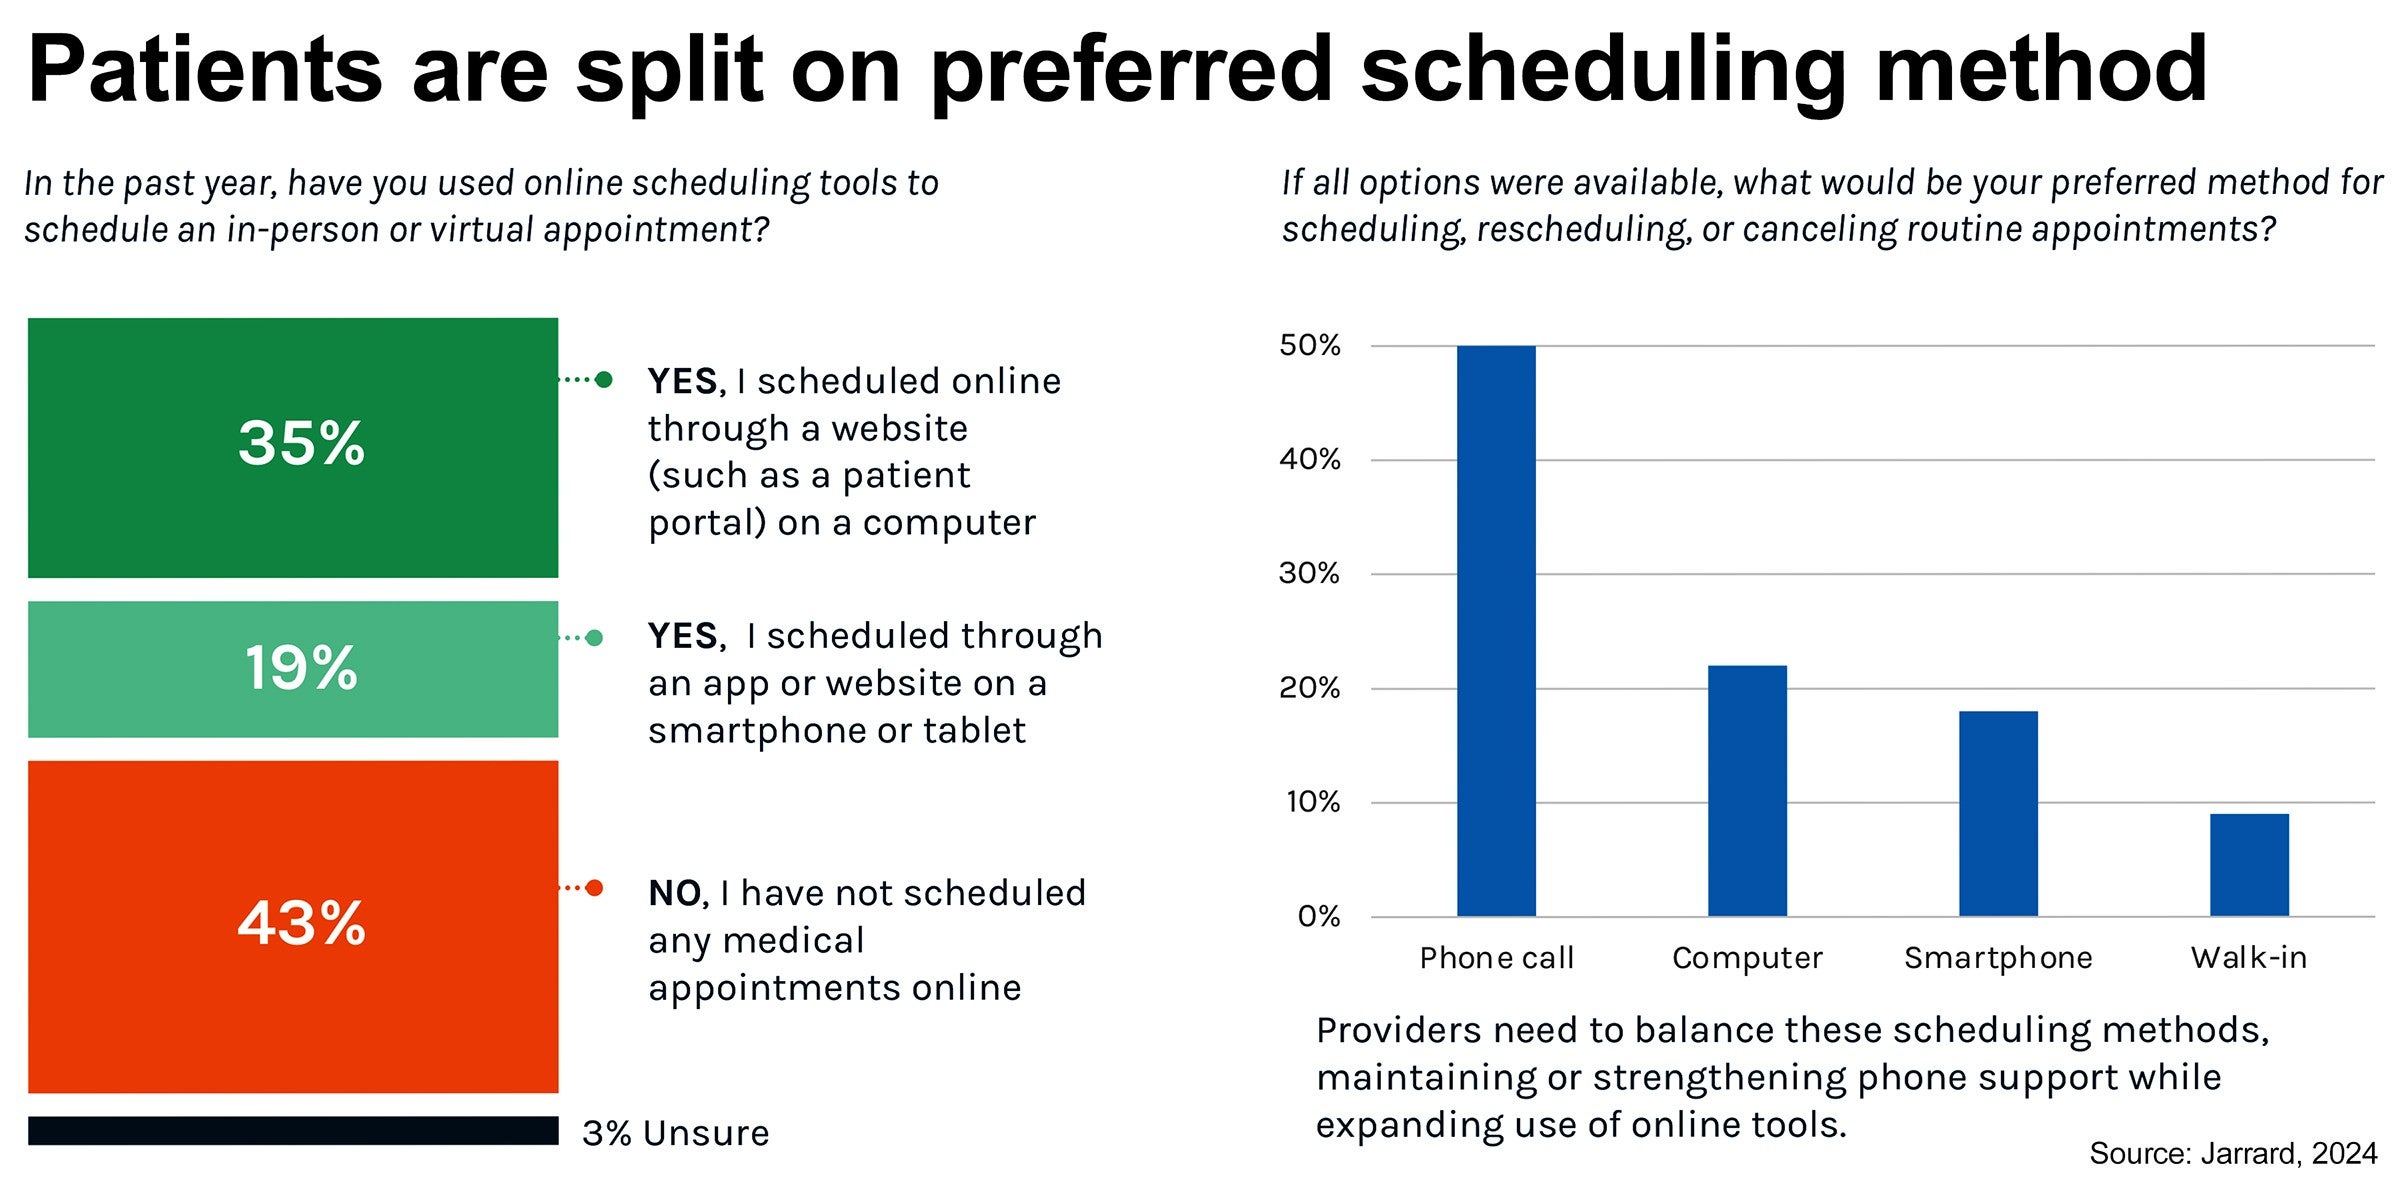 Patients are split on preferred scheduling method. If all options were available, what would be your preferred method for scheduling, rescheduling, or canceling routine appointments? Phone call: 50%. Computer: 22%. Smartphone: 18%. Walk-in: 19%.